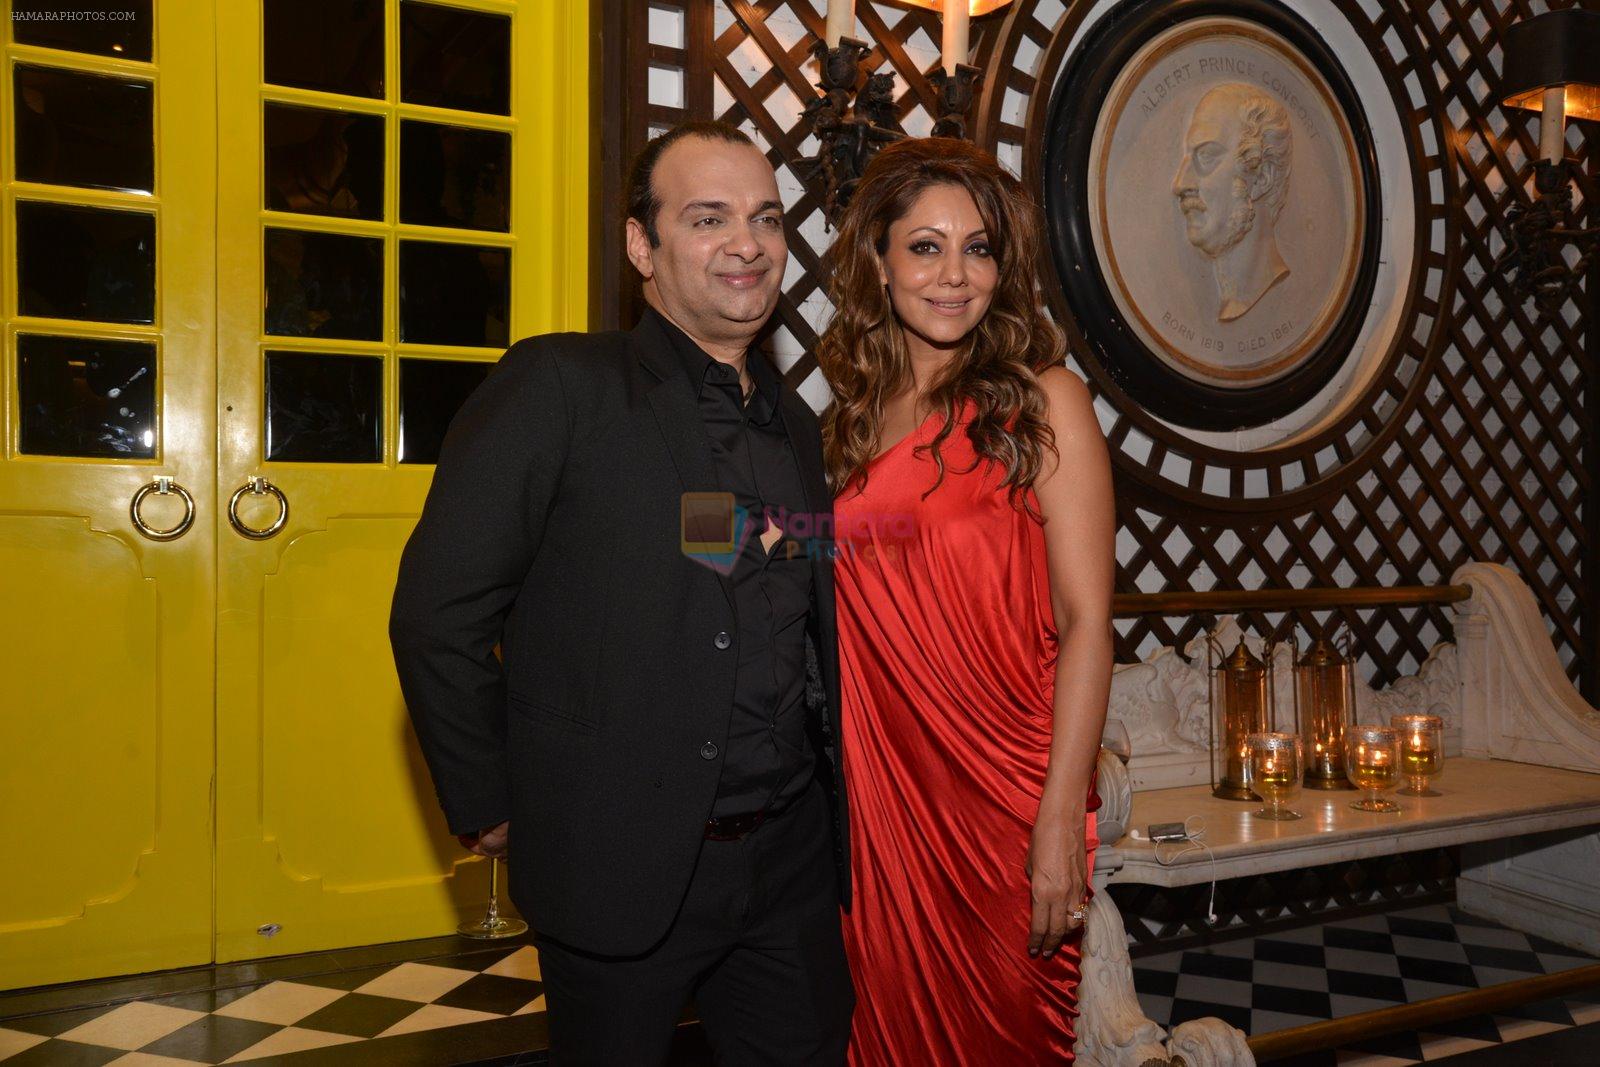 raj anand with gauri khan at Gauri Khan's The Design Cell and Maison & Objet cocktail evening in Lower Parel, Mumbai on 11th Nov 2014